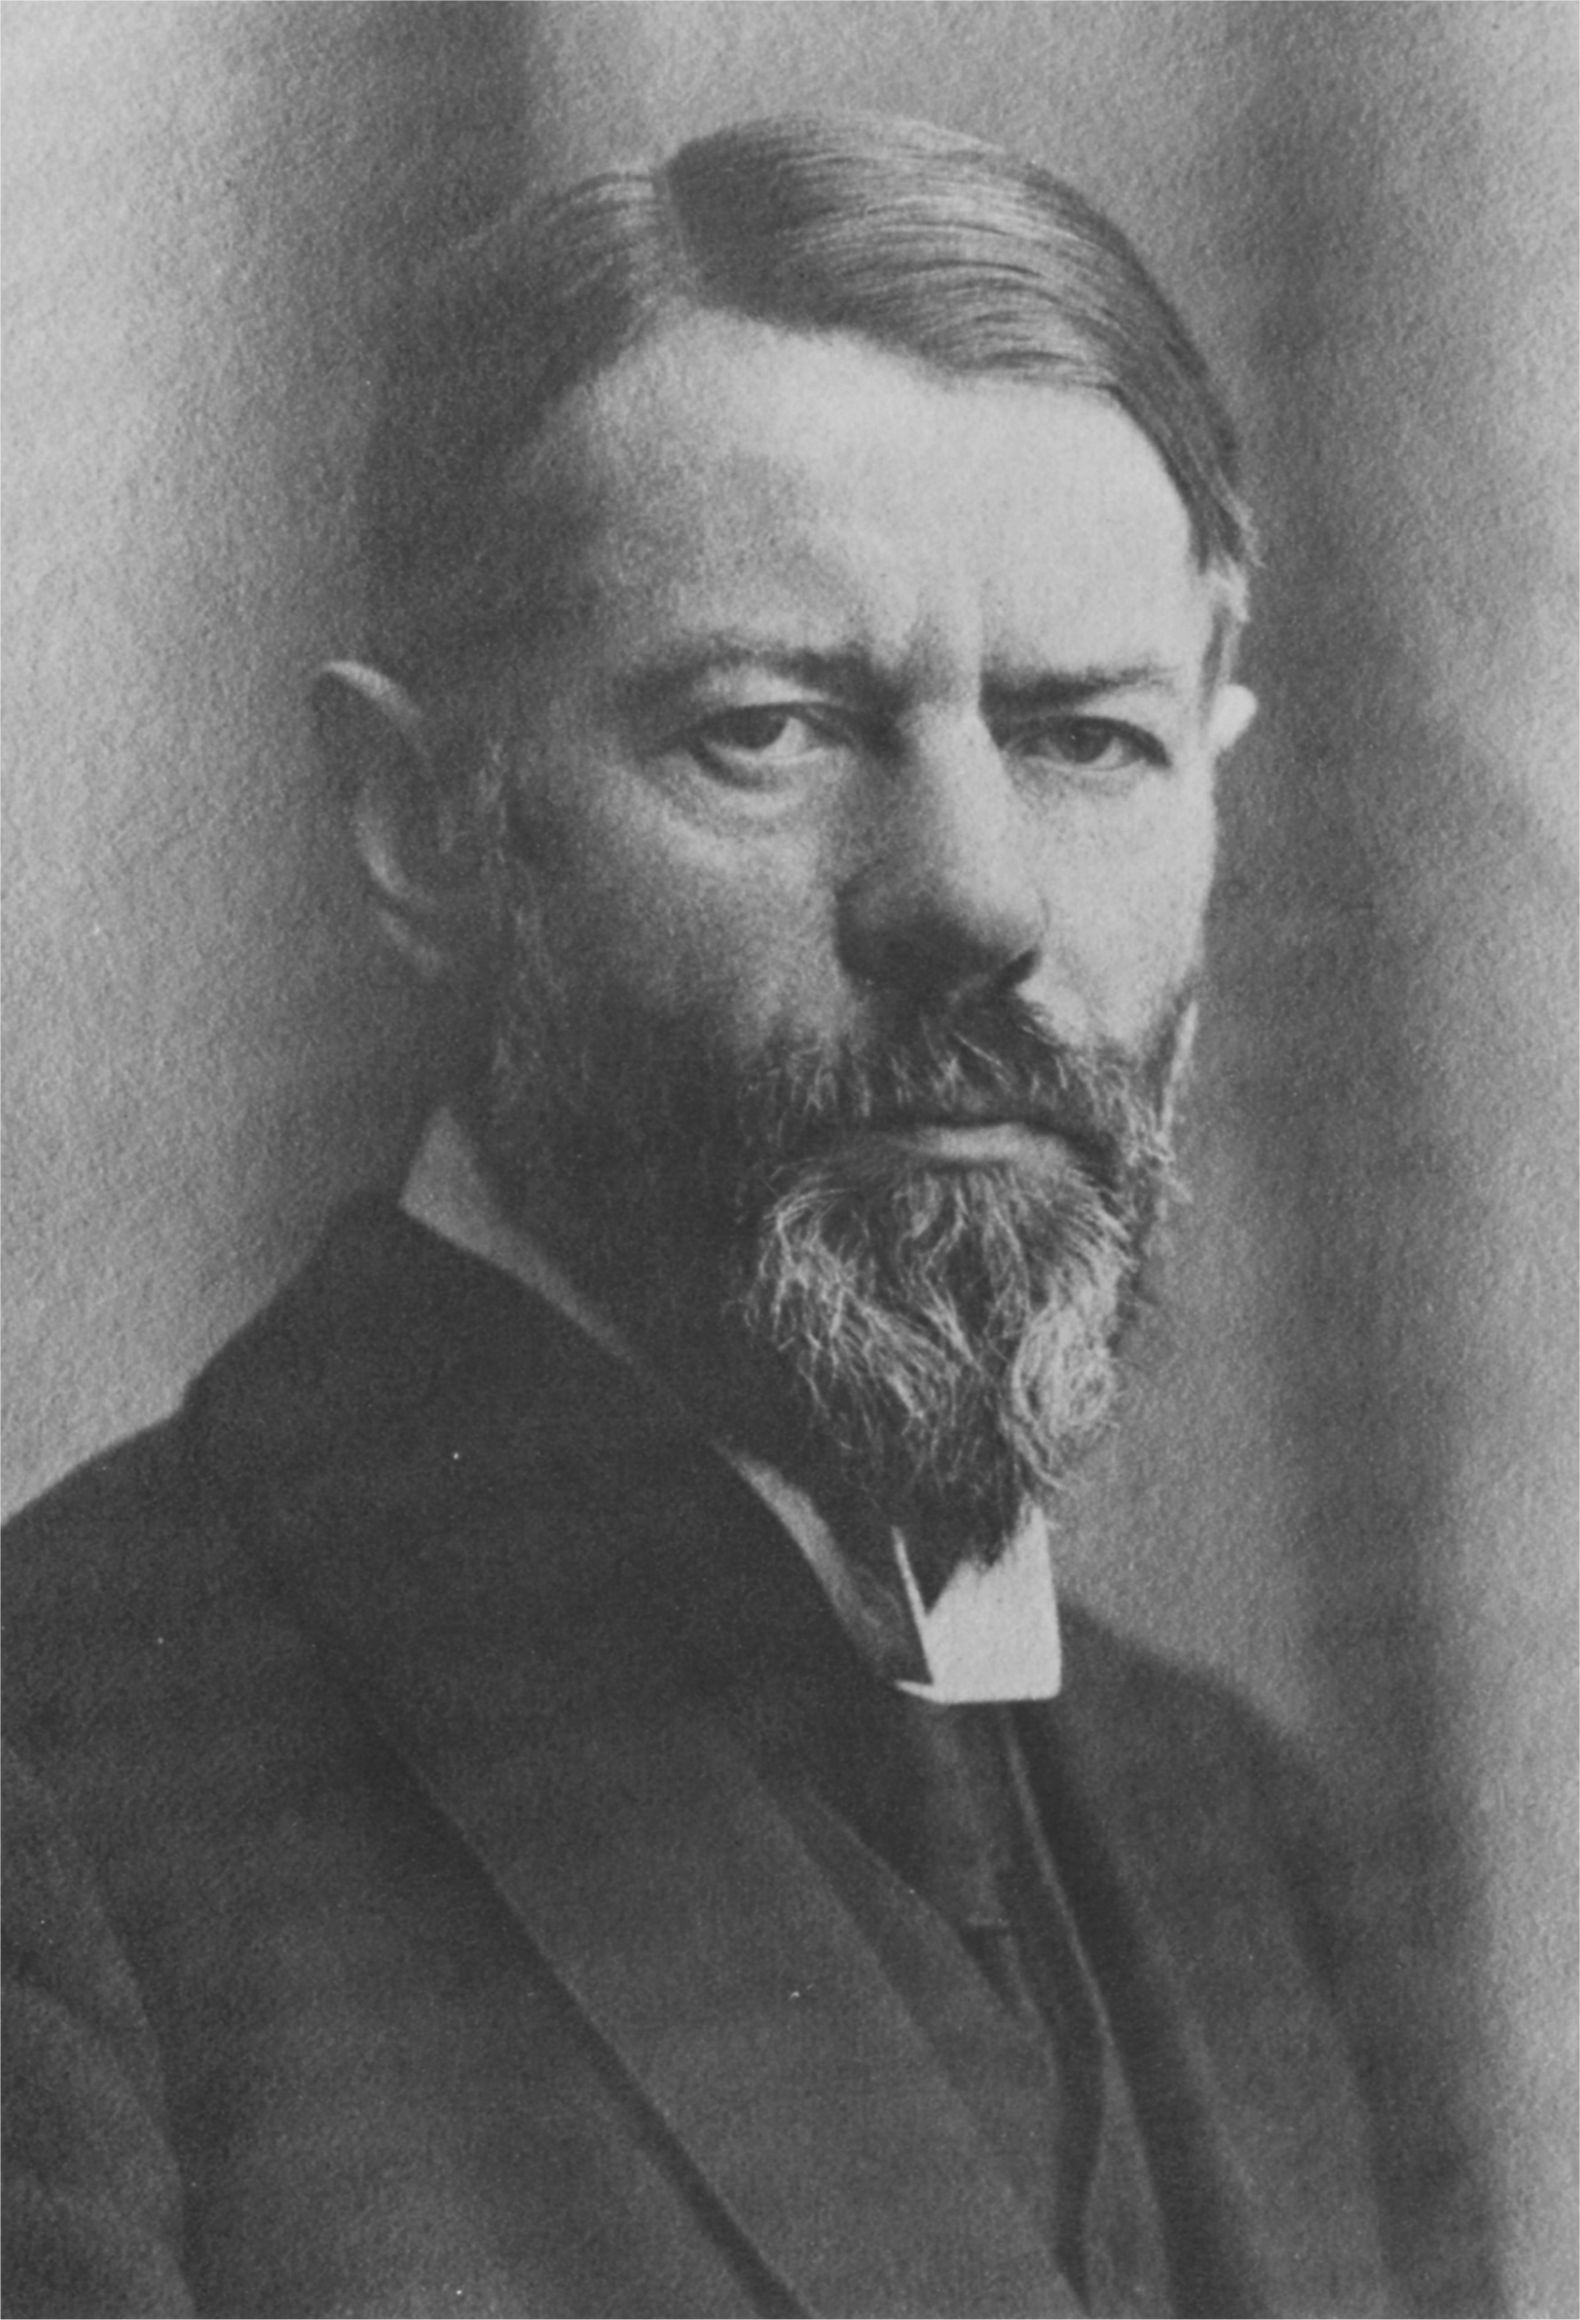 Max Weber Sociology Quotes. QuotesGram